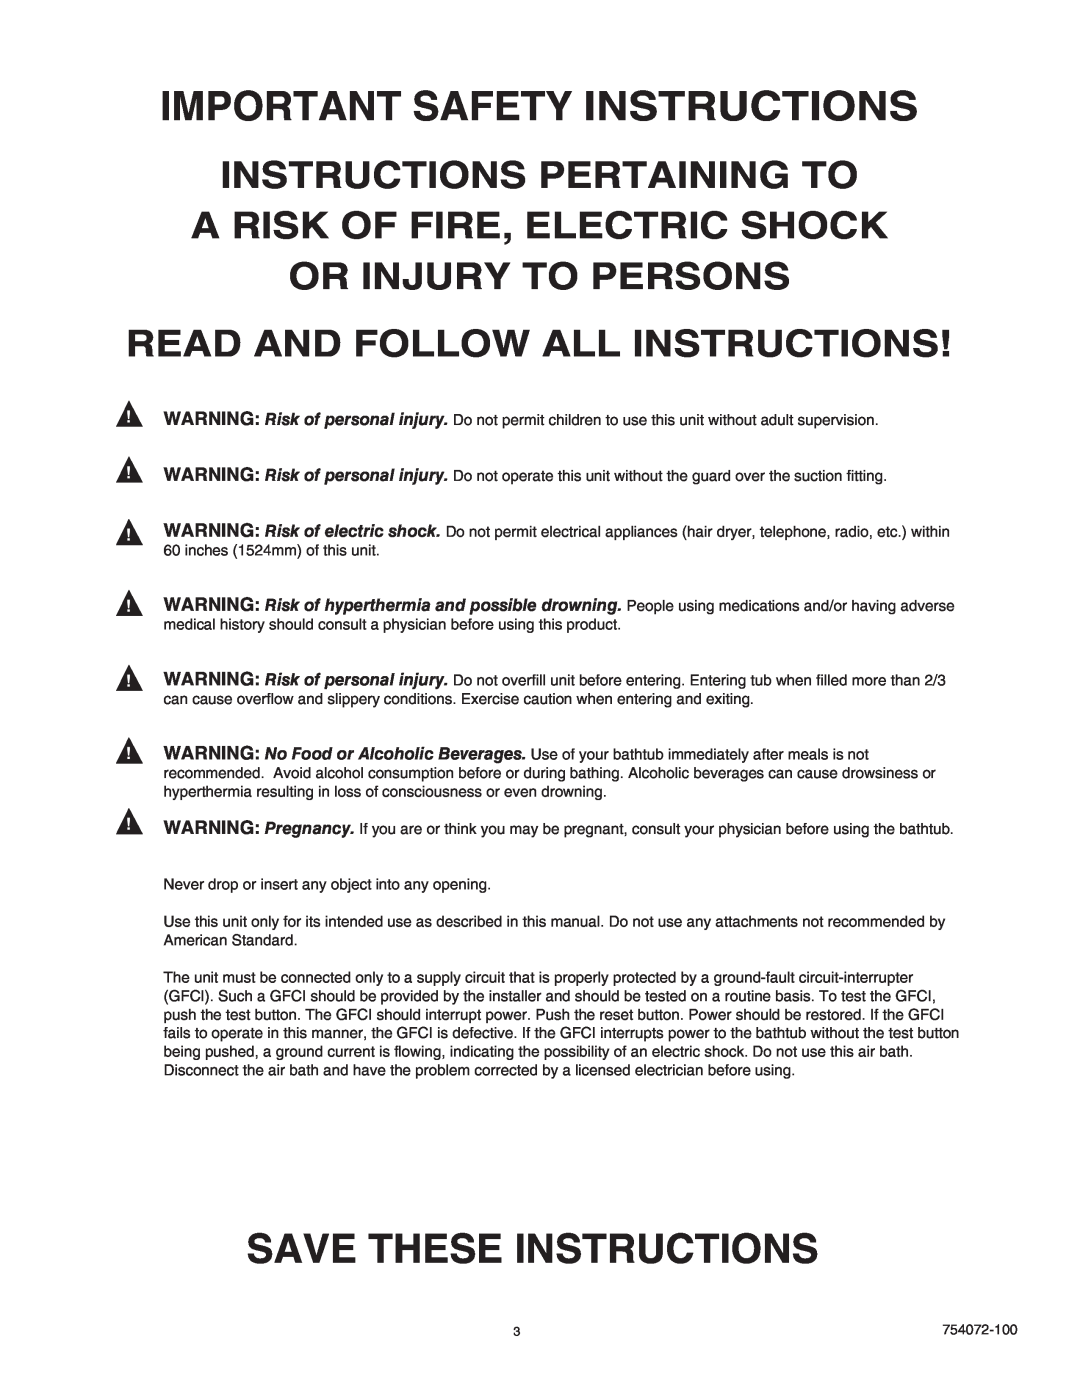 American Standard 2771V.068C Important Safety Instructions, Save These Instructions, Read And Follow All Instructions 